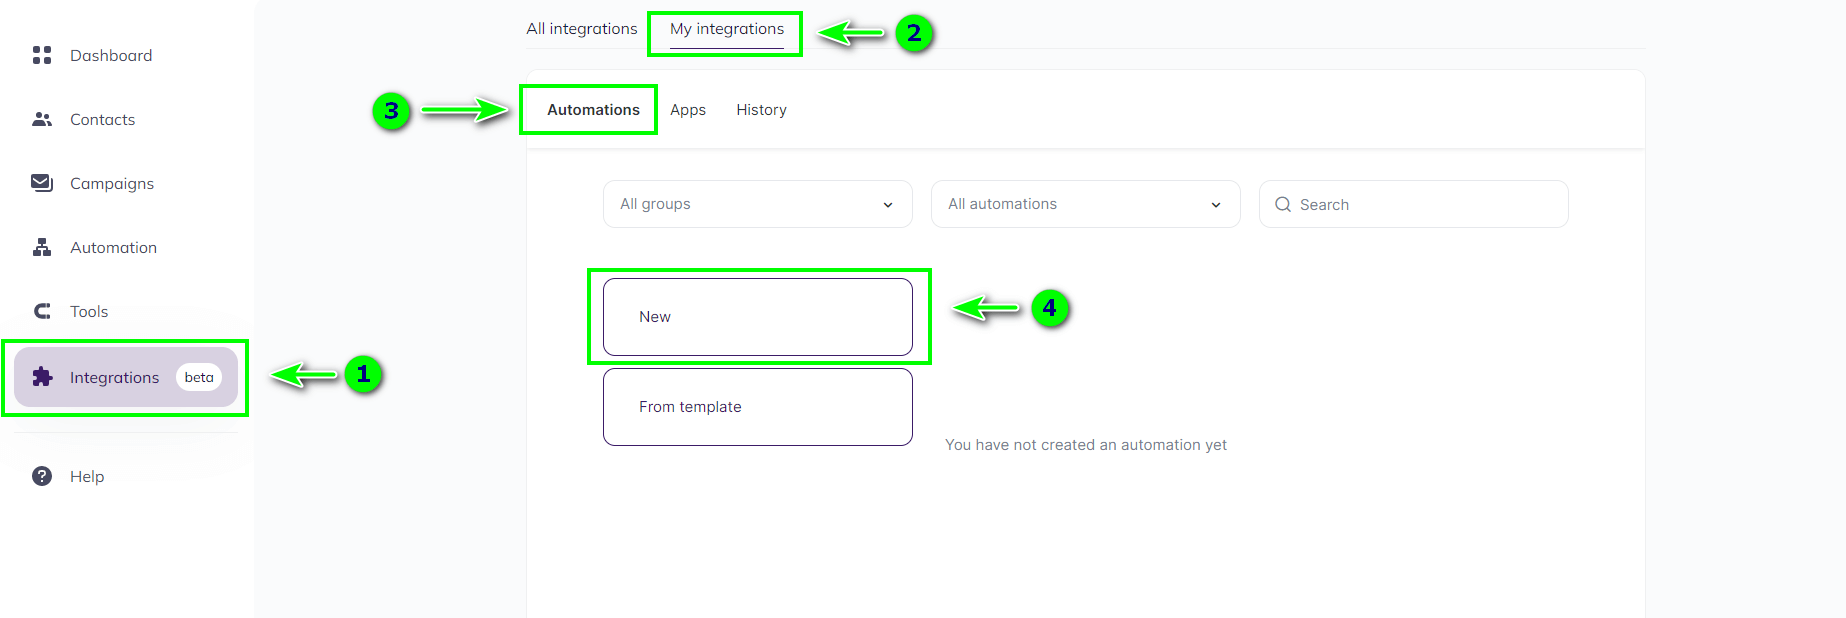 How to connect Selzy with Webflow